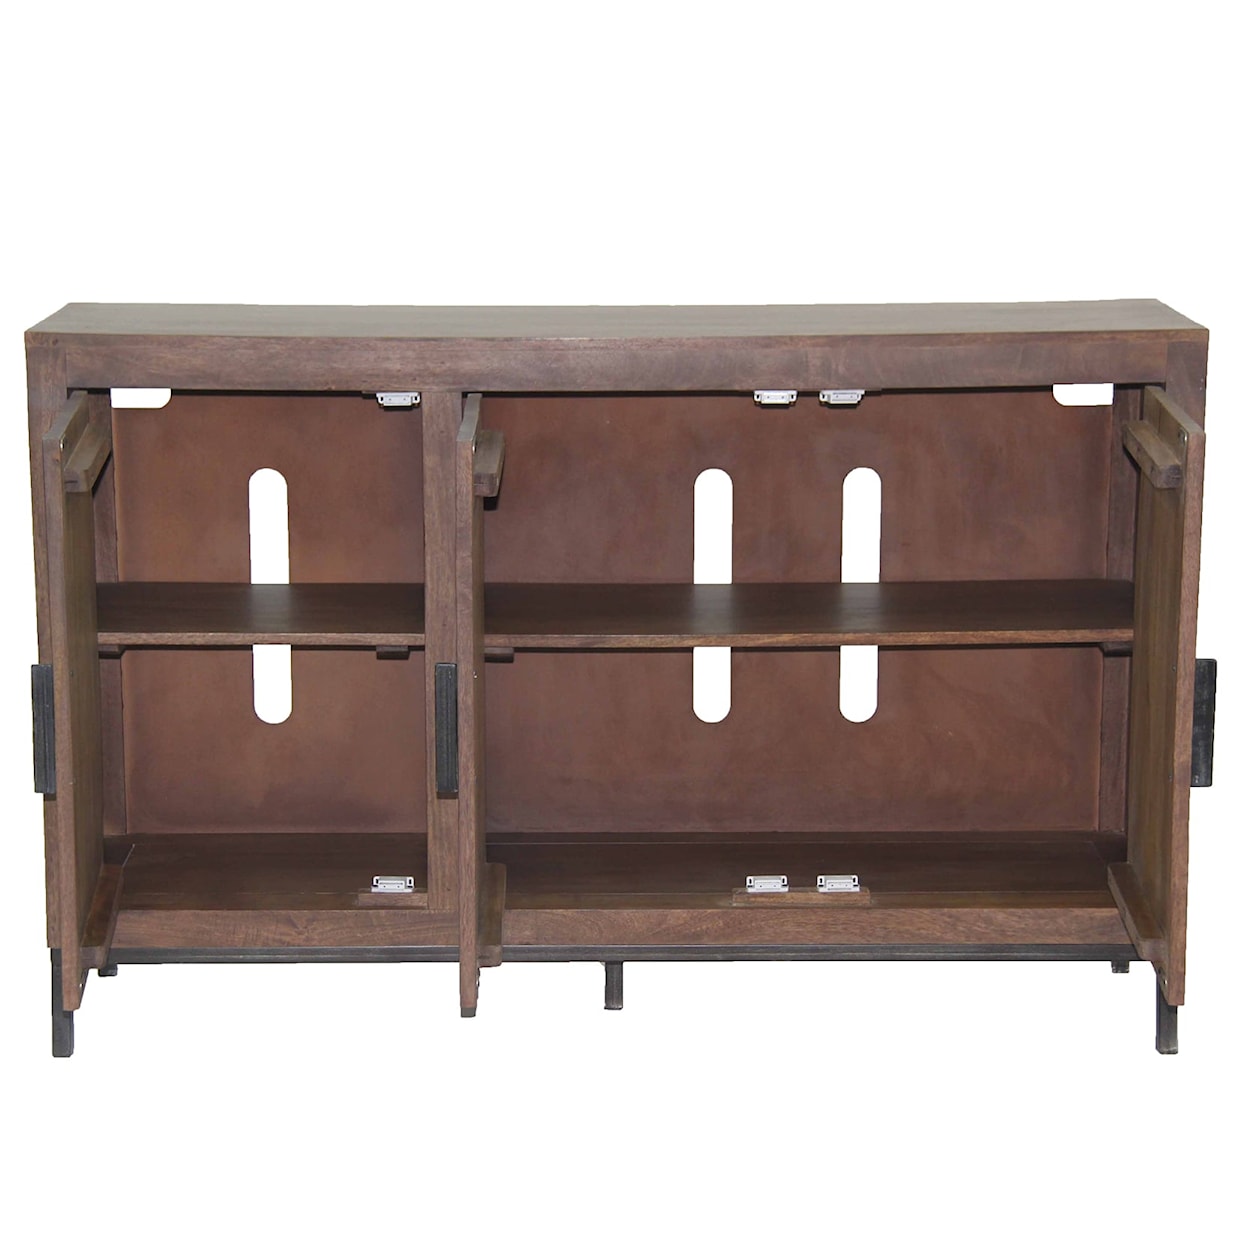 Paramount Furniture Crossings Morocco 57 in. TV Console